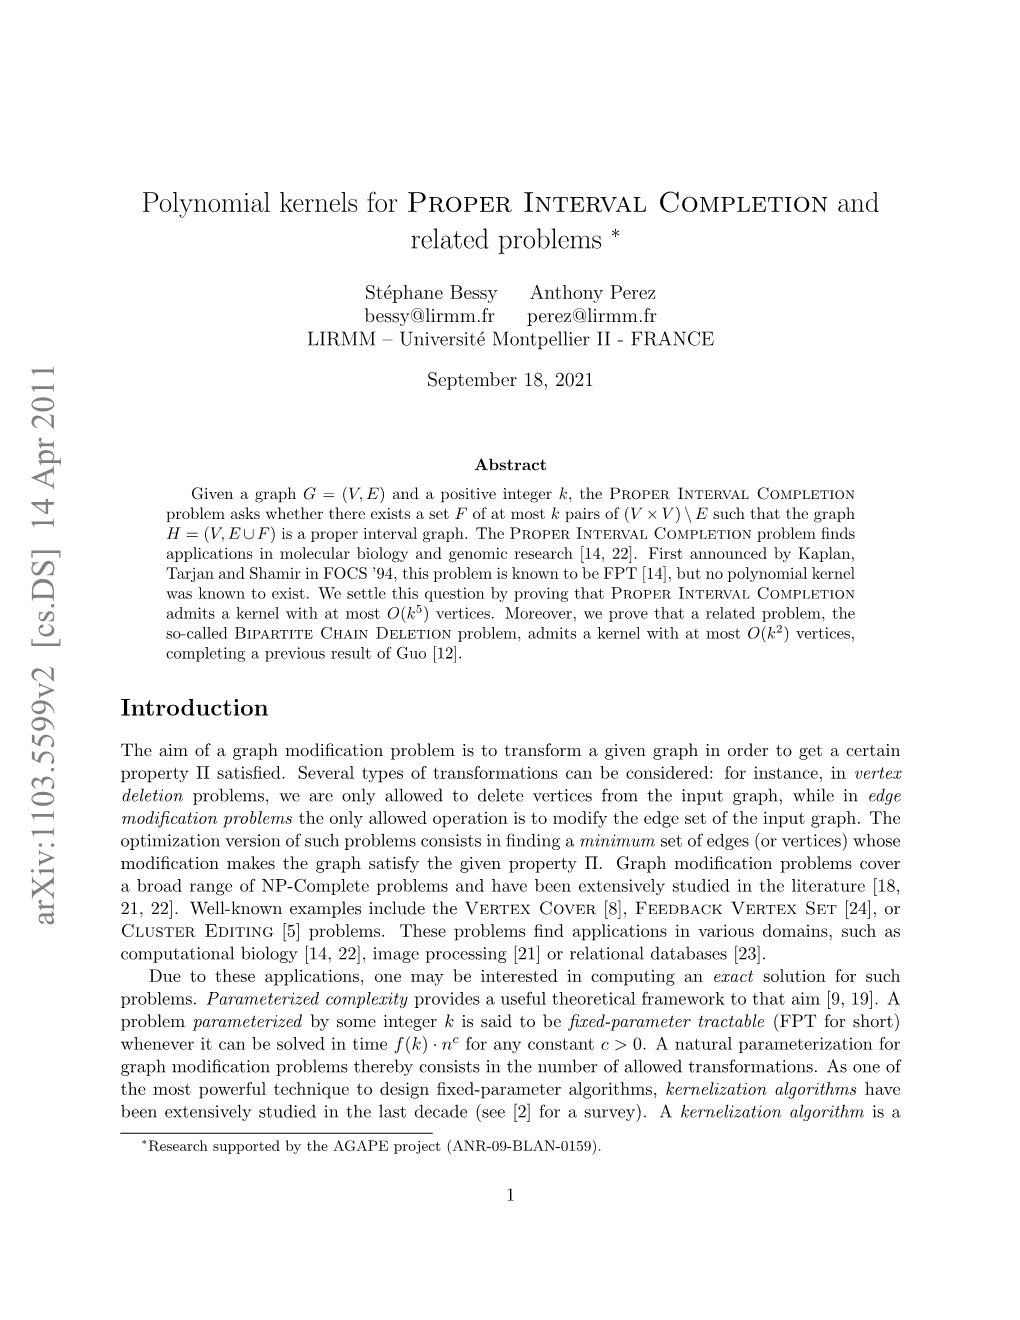 Polynomial Kernels for Proper Interval Completion and Related Problems ∗